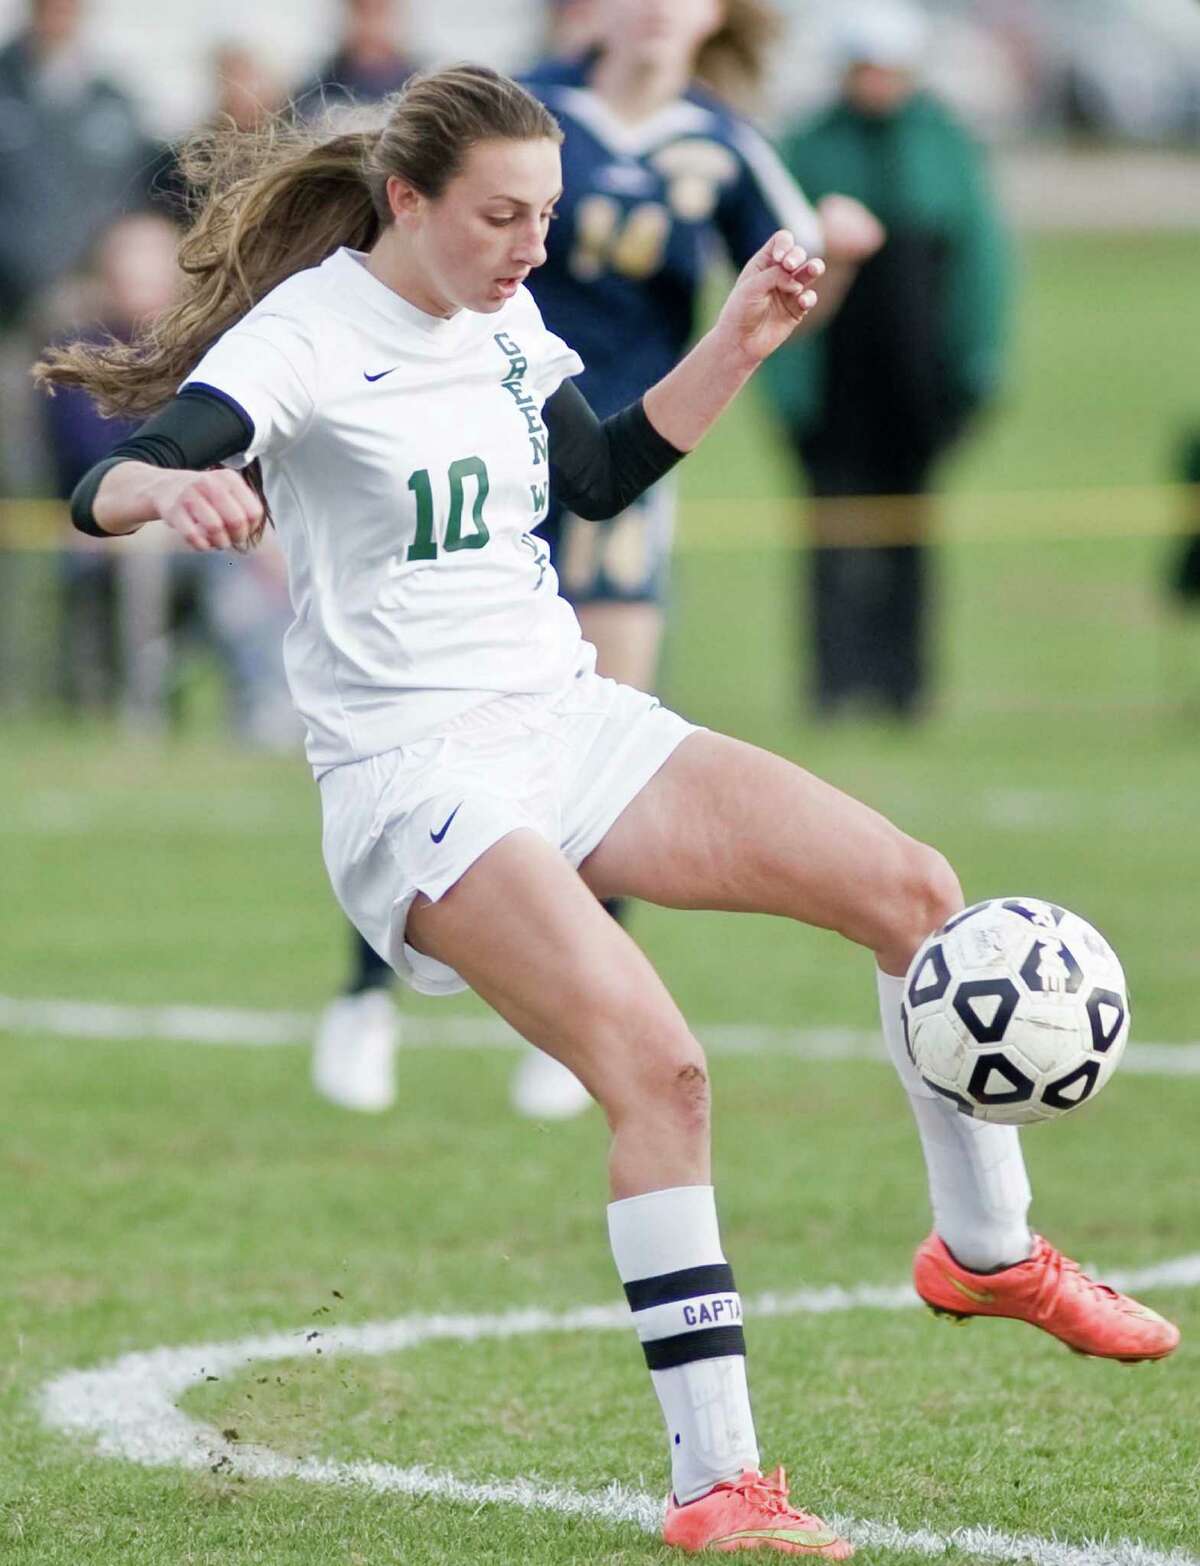 FILE PHOTO: New Milford High School's Monica Baxter gets control of the ball in the Class LL game against Simsbury High School, played at New Milford High School. Friday, Nov 13, 2015